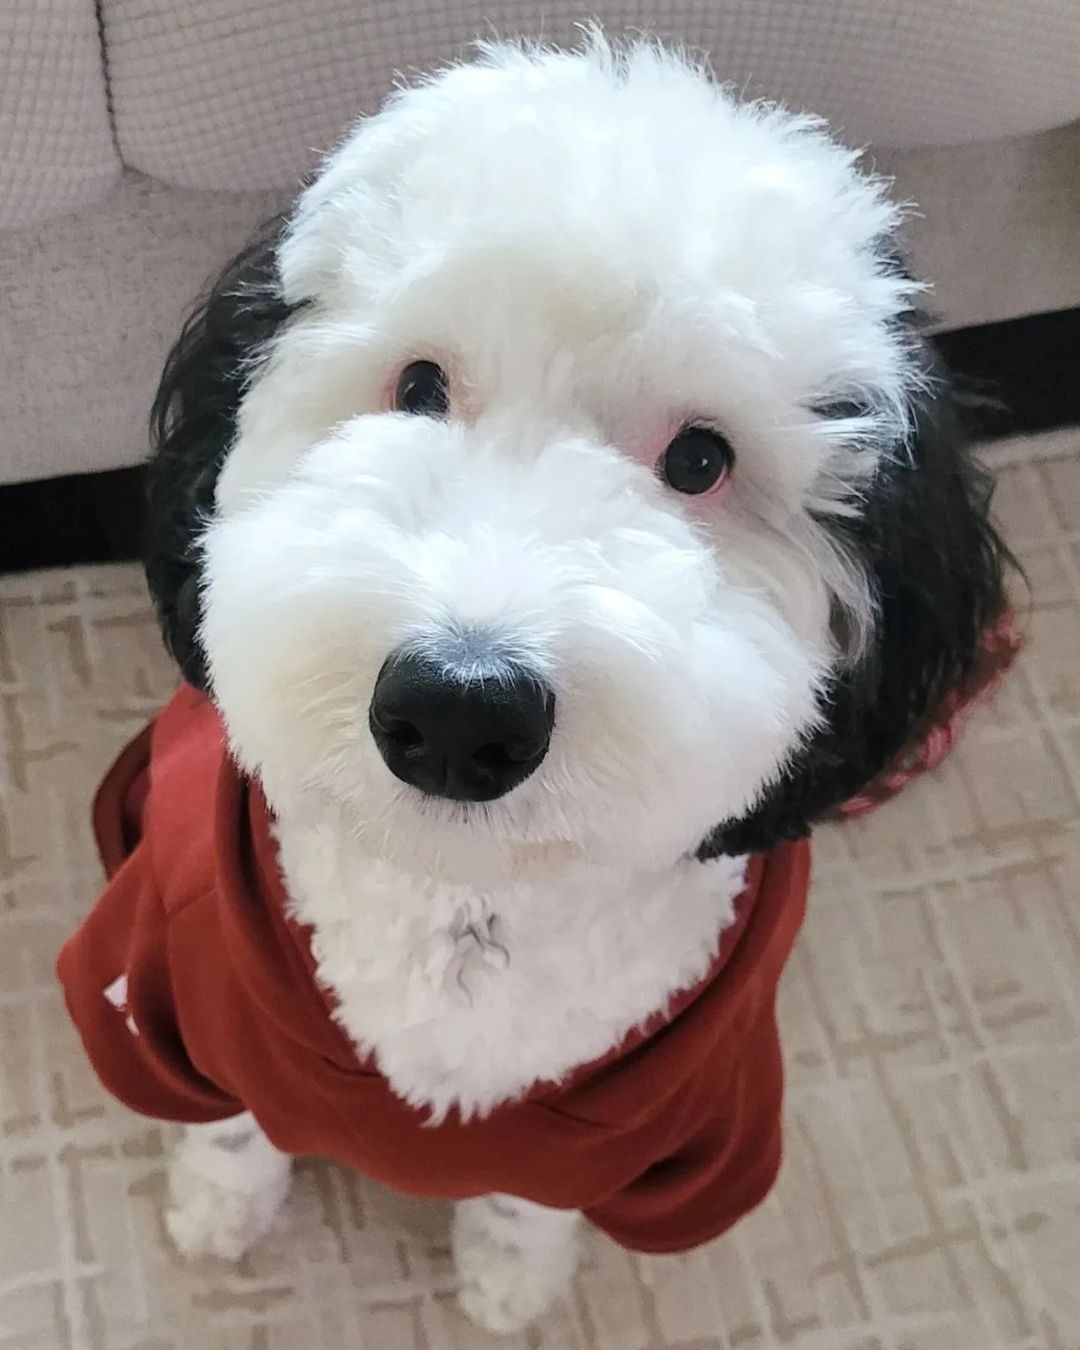 Bayley the dog who looks like Snoopy, wearing a red shirt.